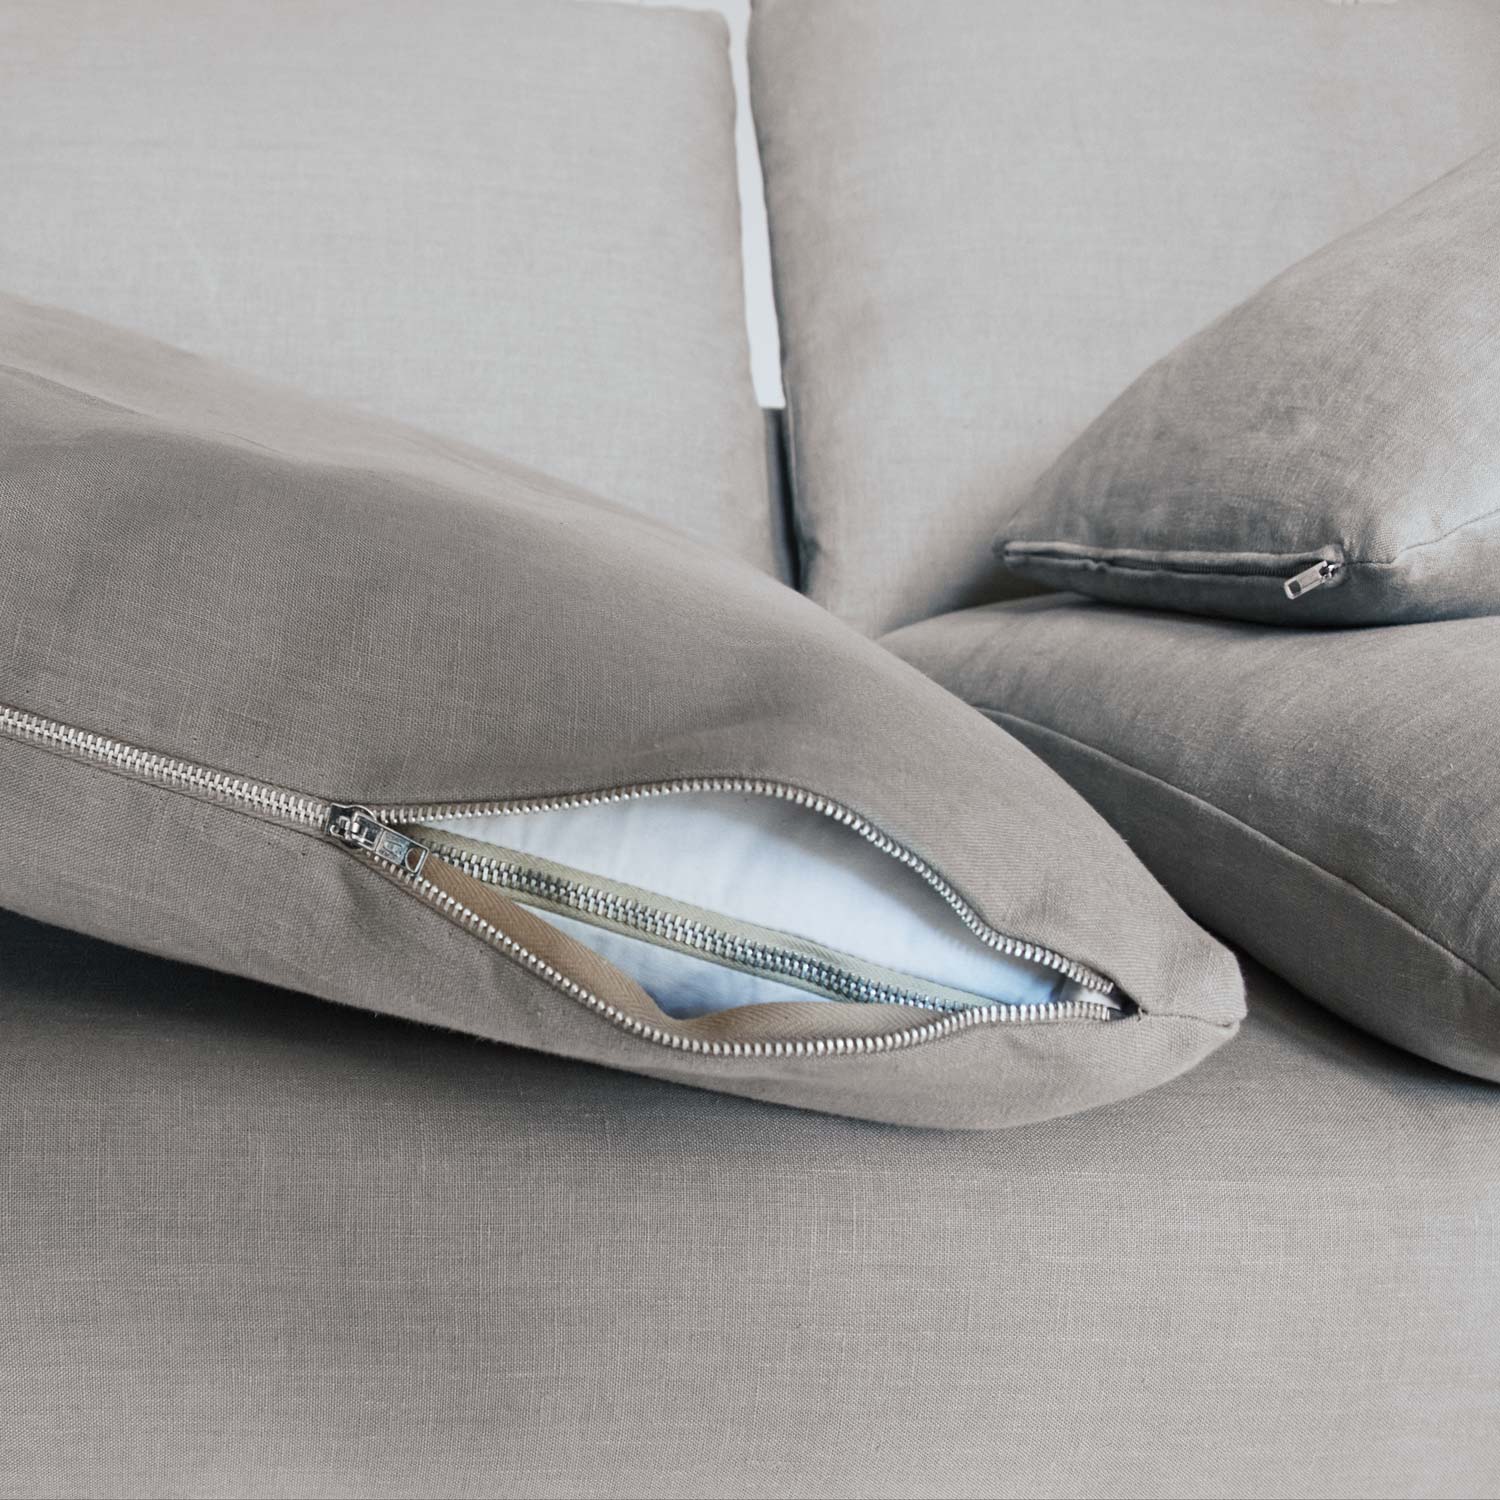 Armrest Cushions - Versatile Headrests for Relaxation